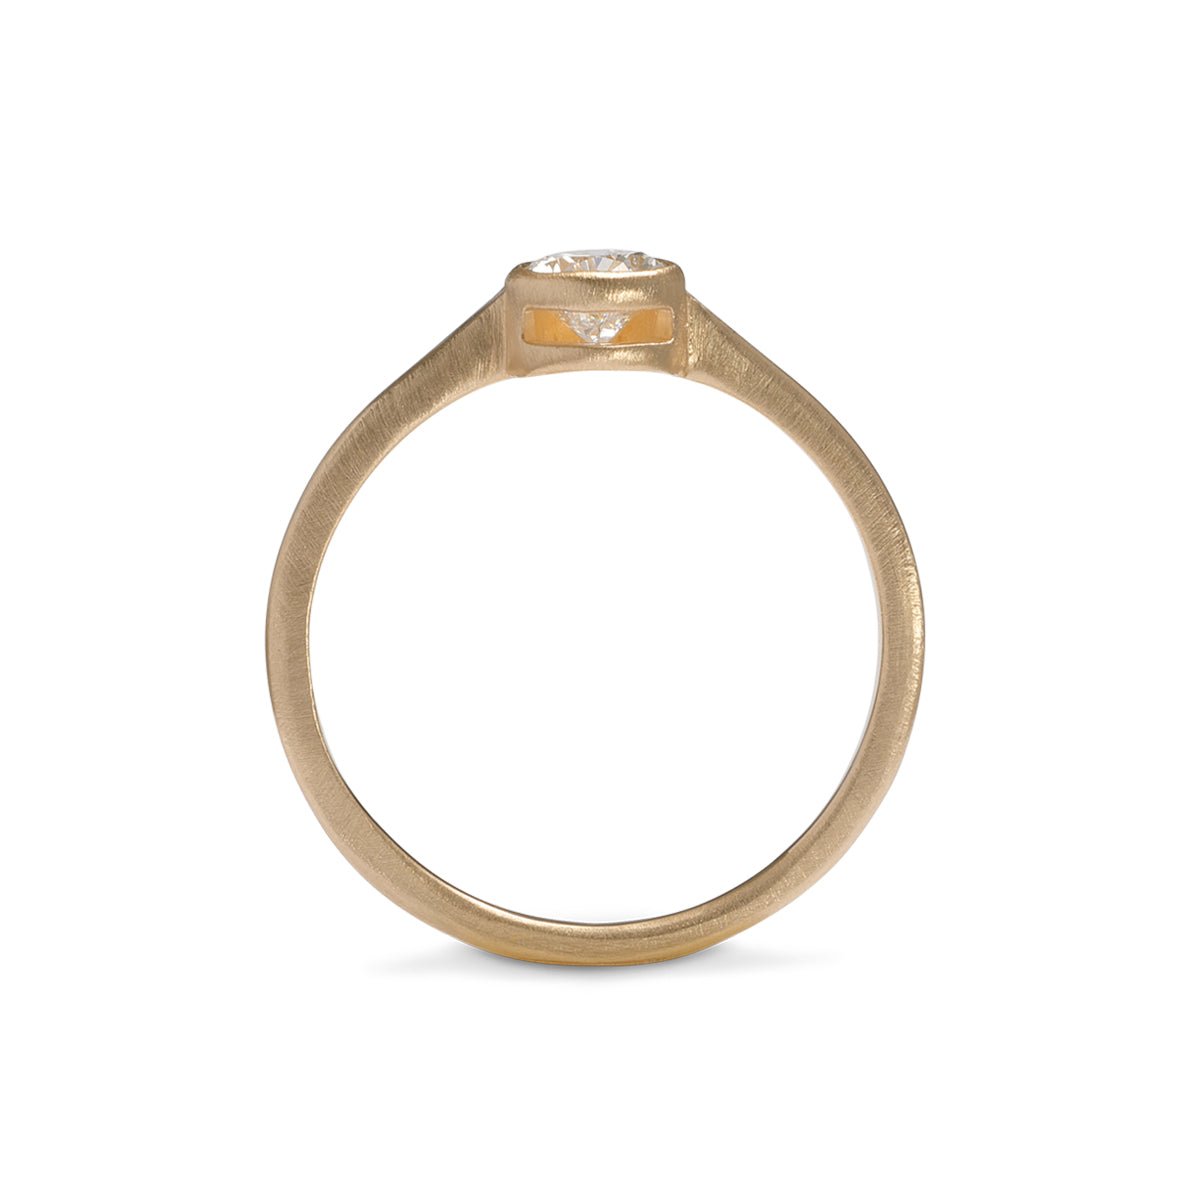 Modern pear shaped Votum ring from Betsy & Iya. With a cut-out 14K gold band and lab-grown diamond (0.5 ct).